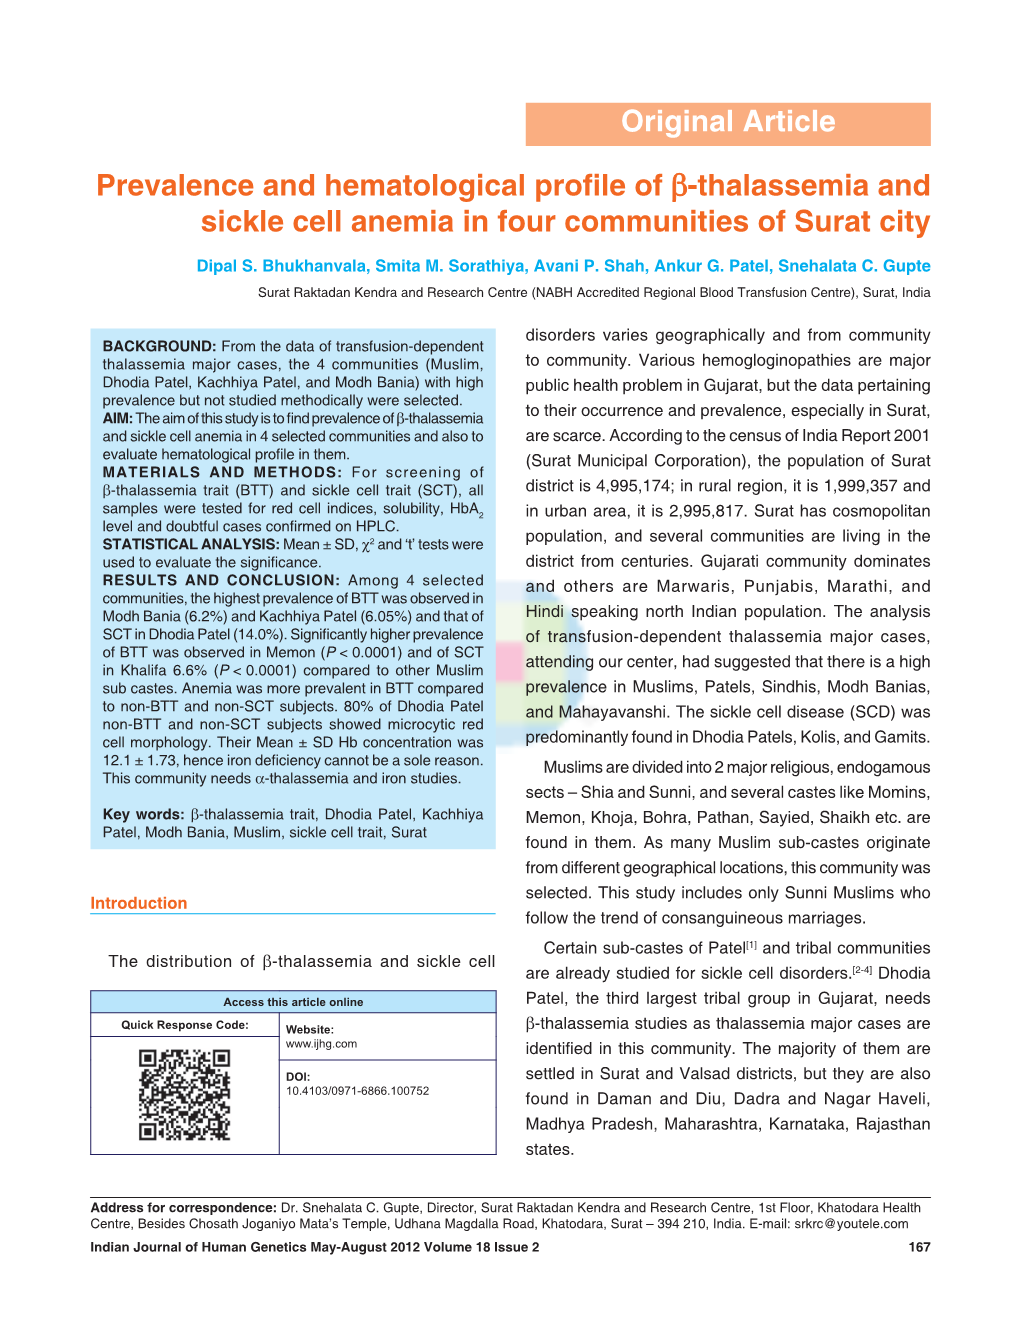 Prevalence and Hematological Profile of -Thalassemia and Sickle Cell